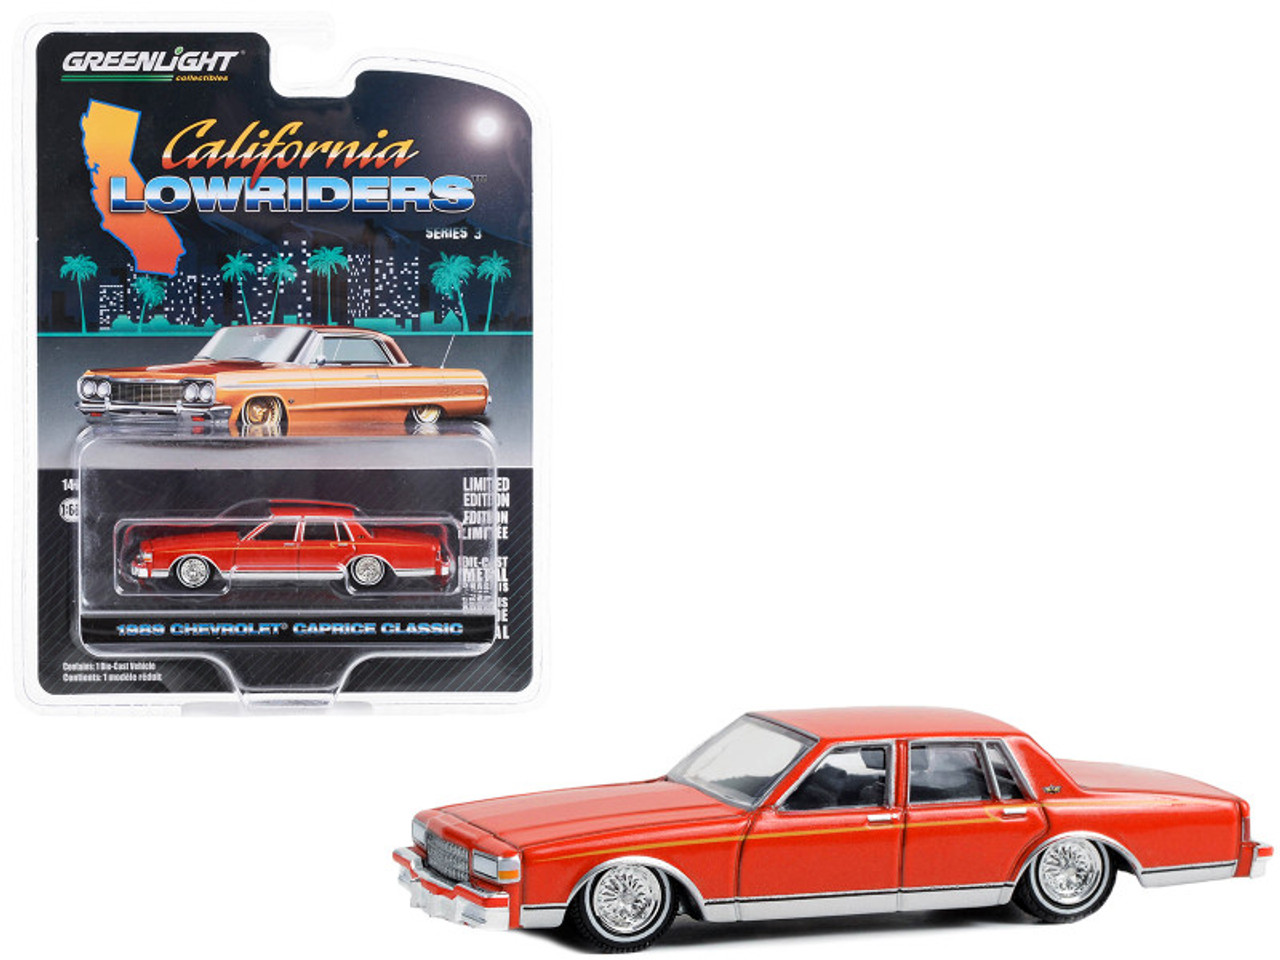 1989 Chevrolet Caprice Classic Lowrider Custom Red Orange with Yellow Stripes "California Lowriders" Series 3 1/64 Diecast Model Car by Greenlight